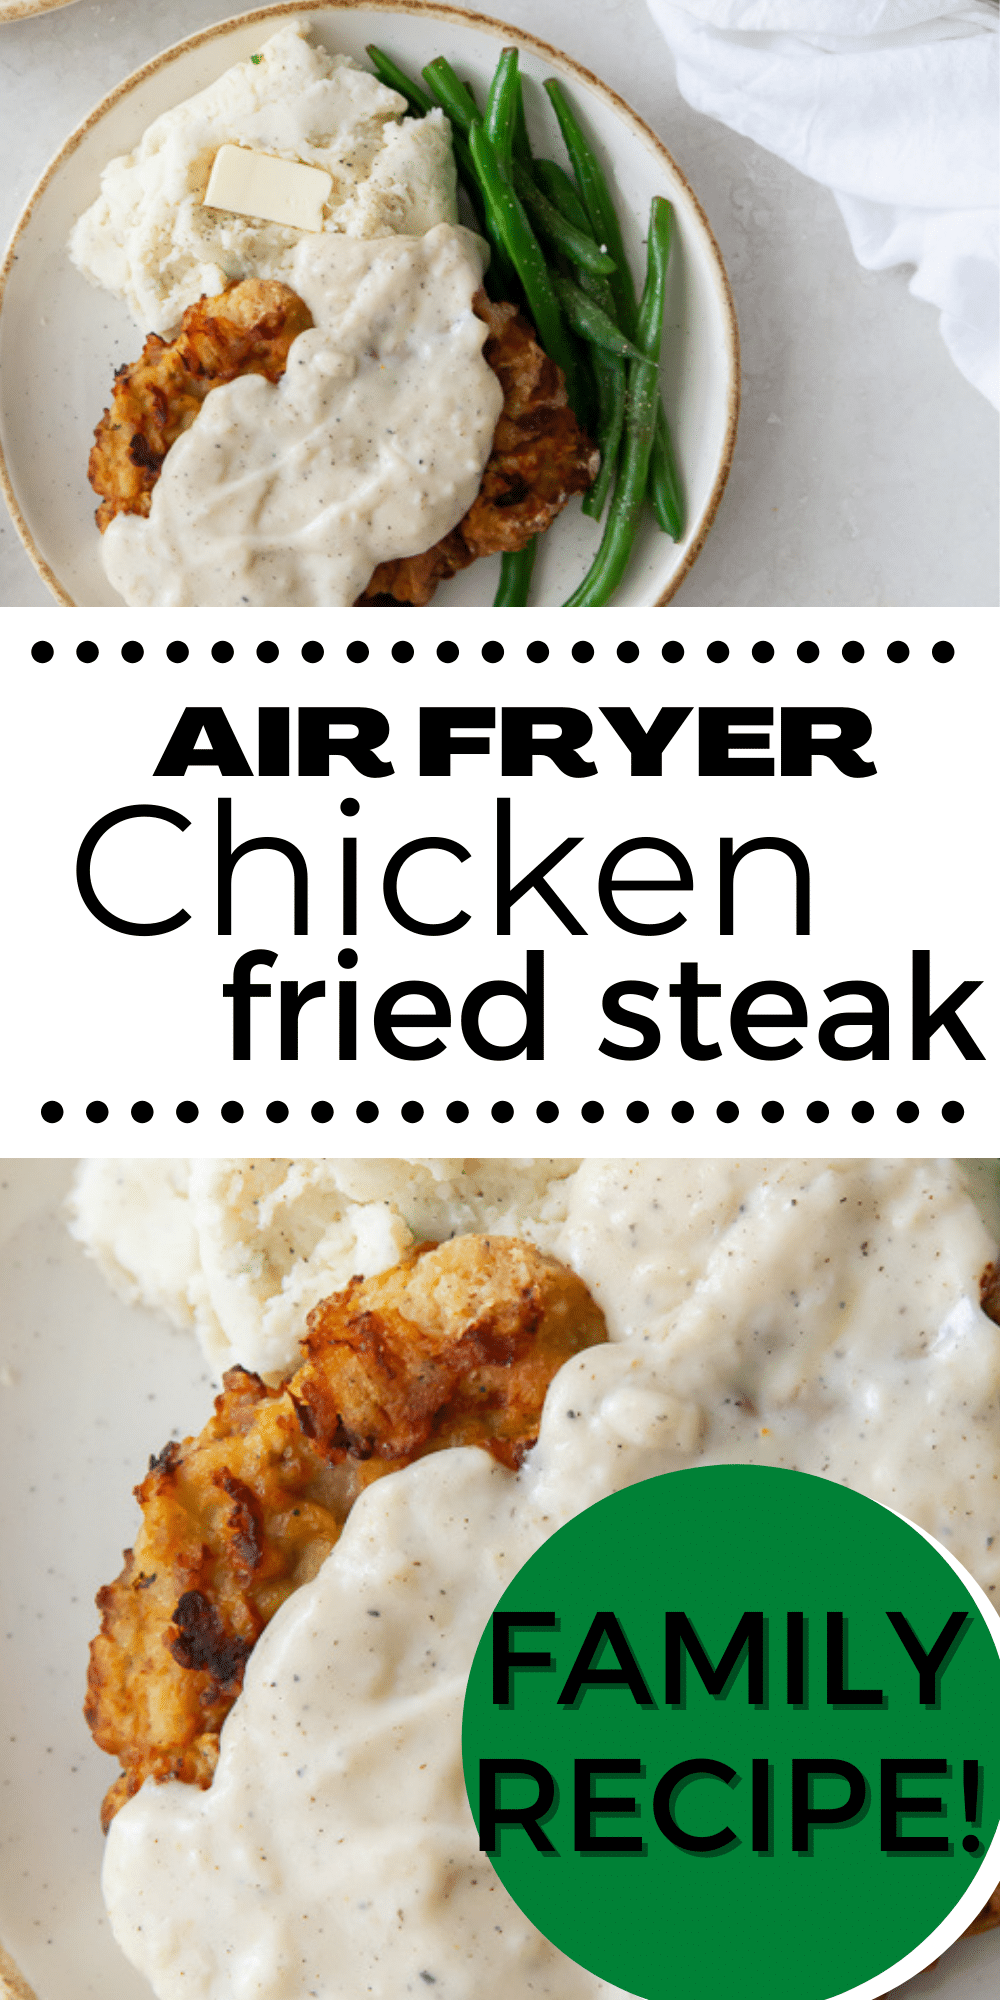 Image of air fryer chicken fried steak with text overlay